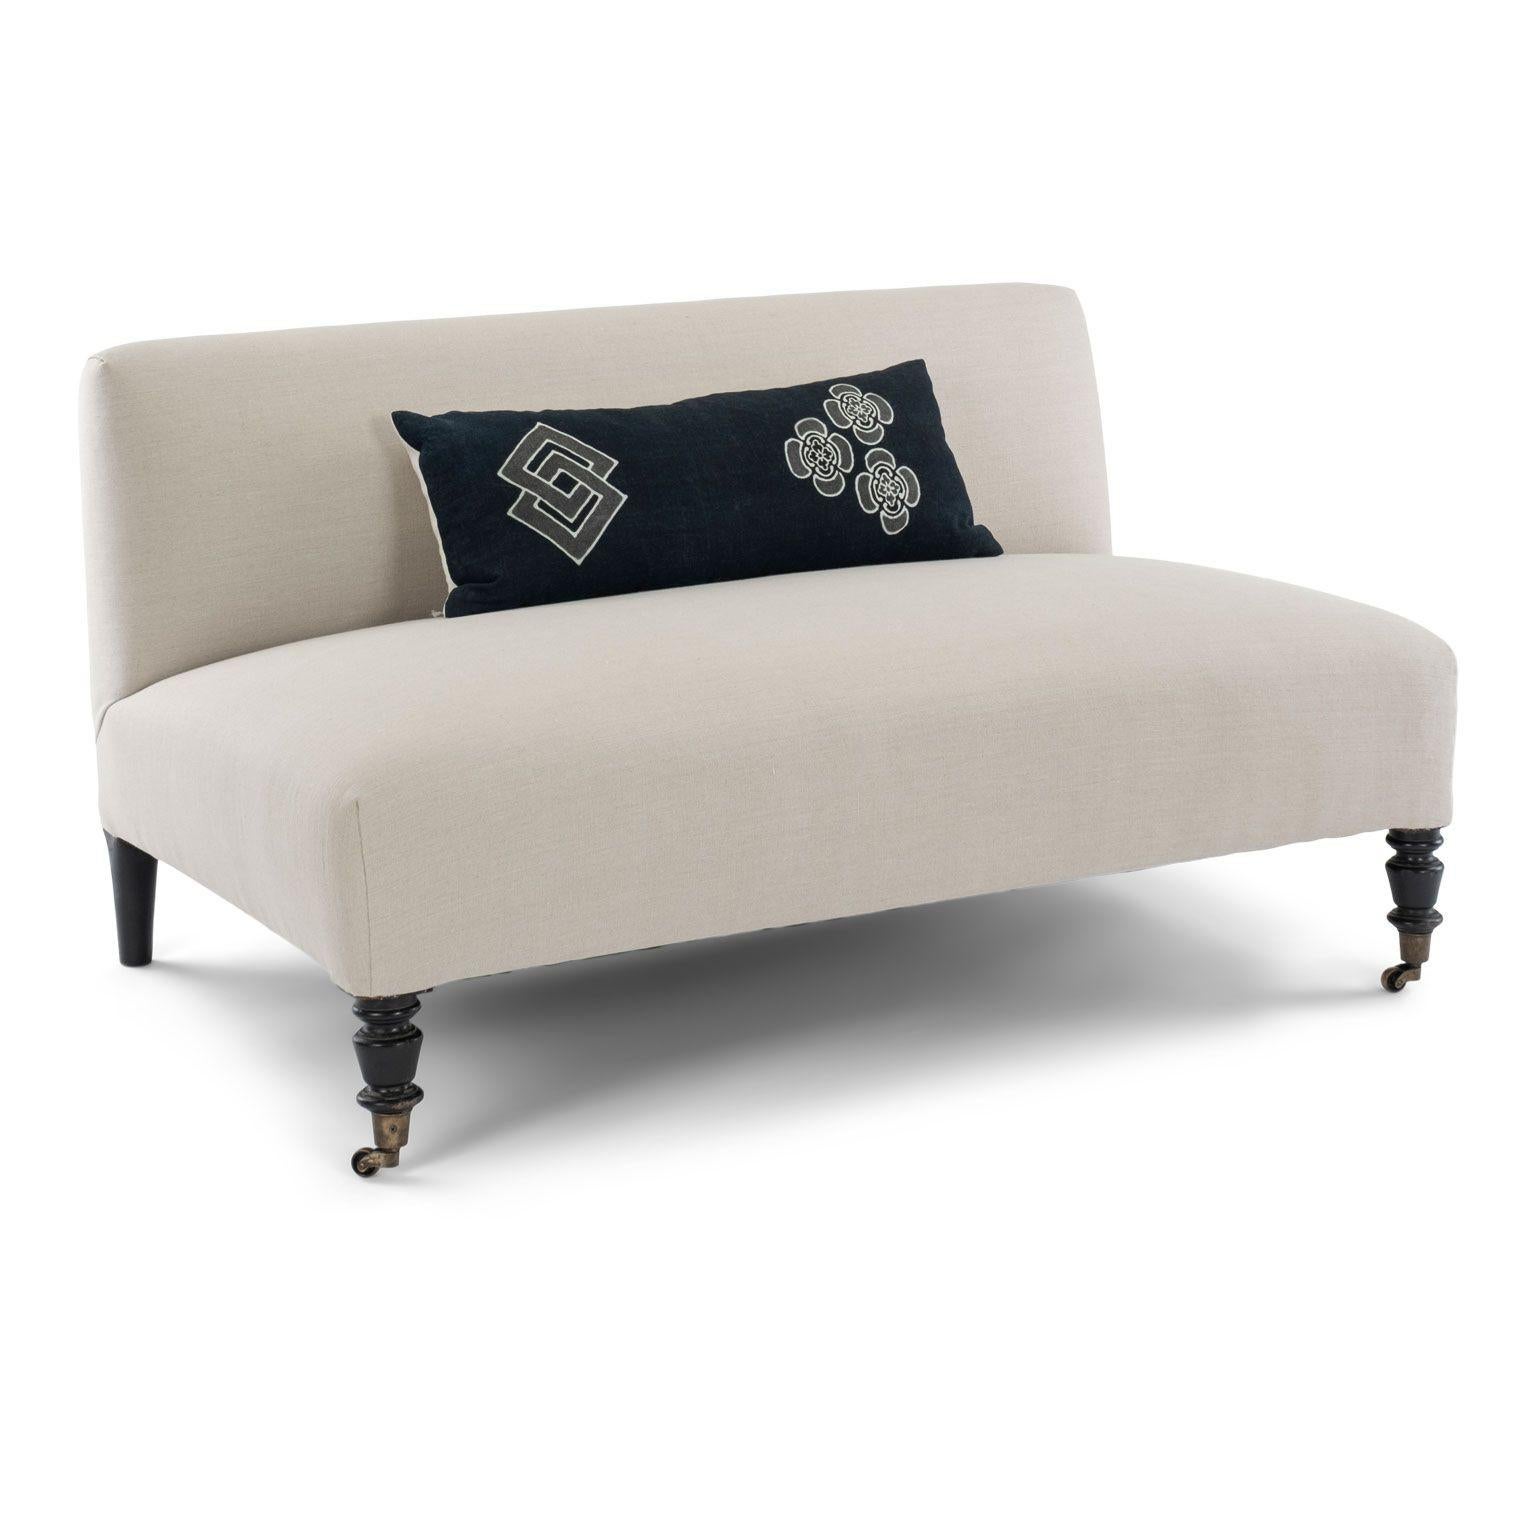 Low-profile Napoleon III French banquette, or settee, circa 1860-1879. Turned, ebonized legs front legs set into brass casters. Ebonized, hand-carved rear legs. Newly upholstered in neutral-color linen.